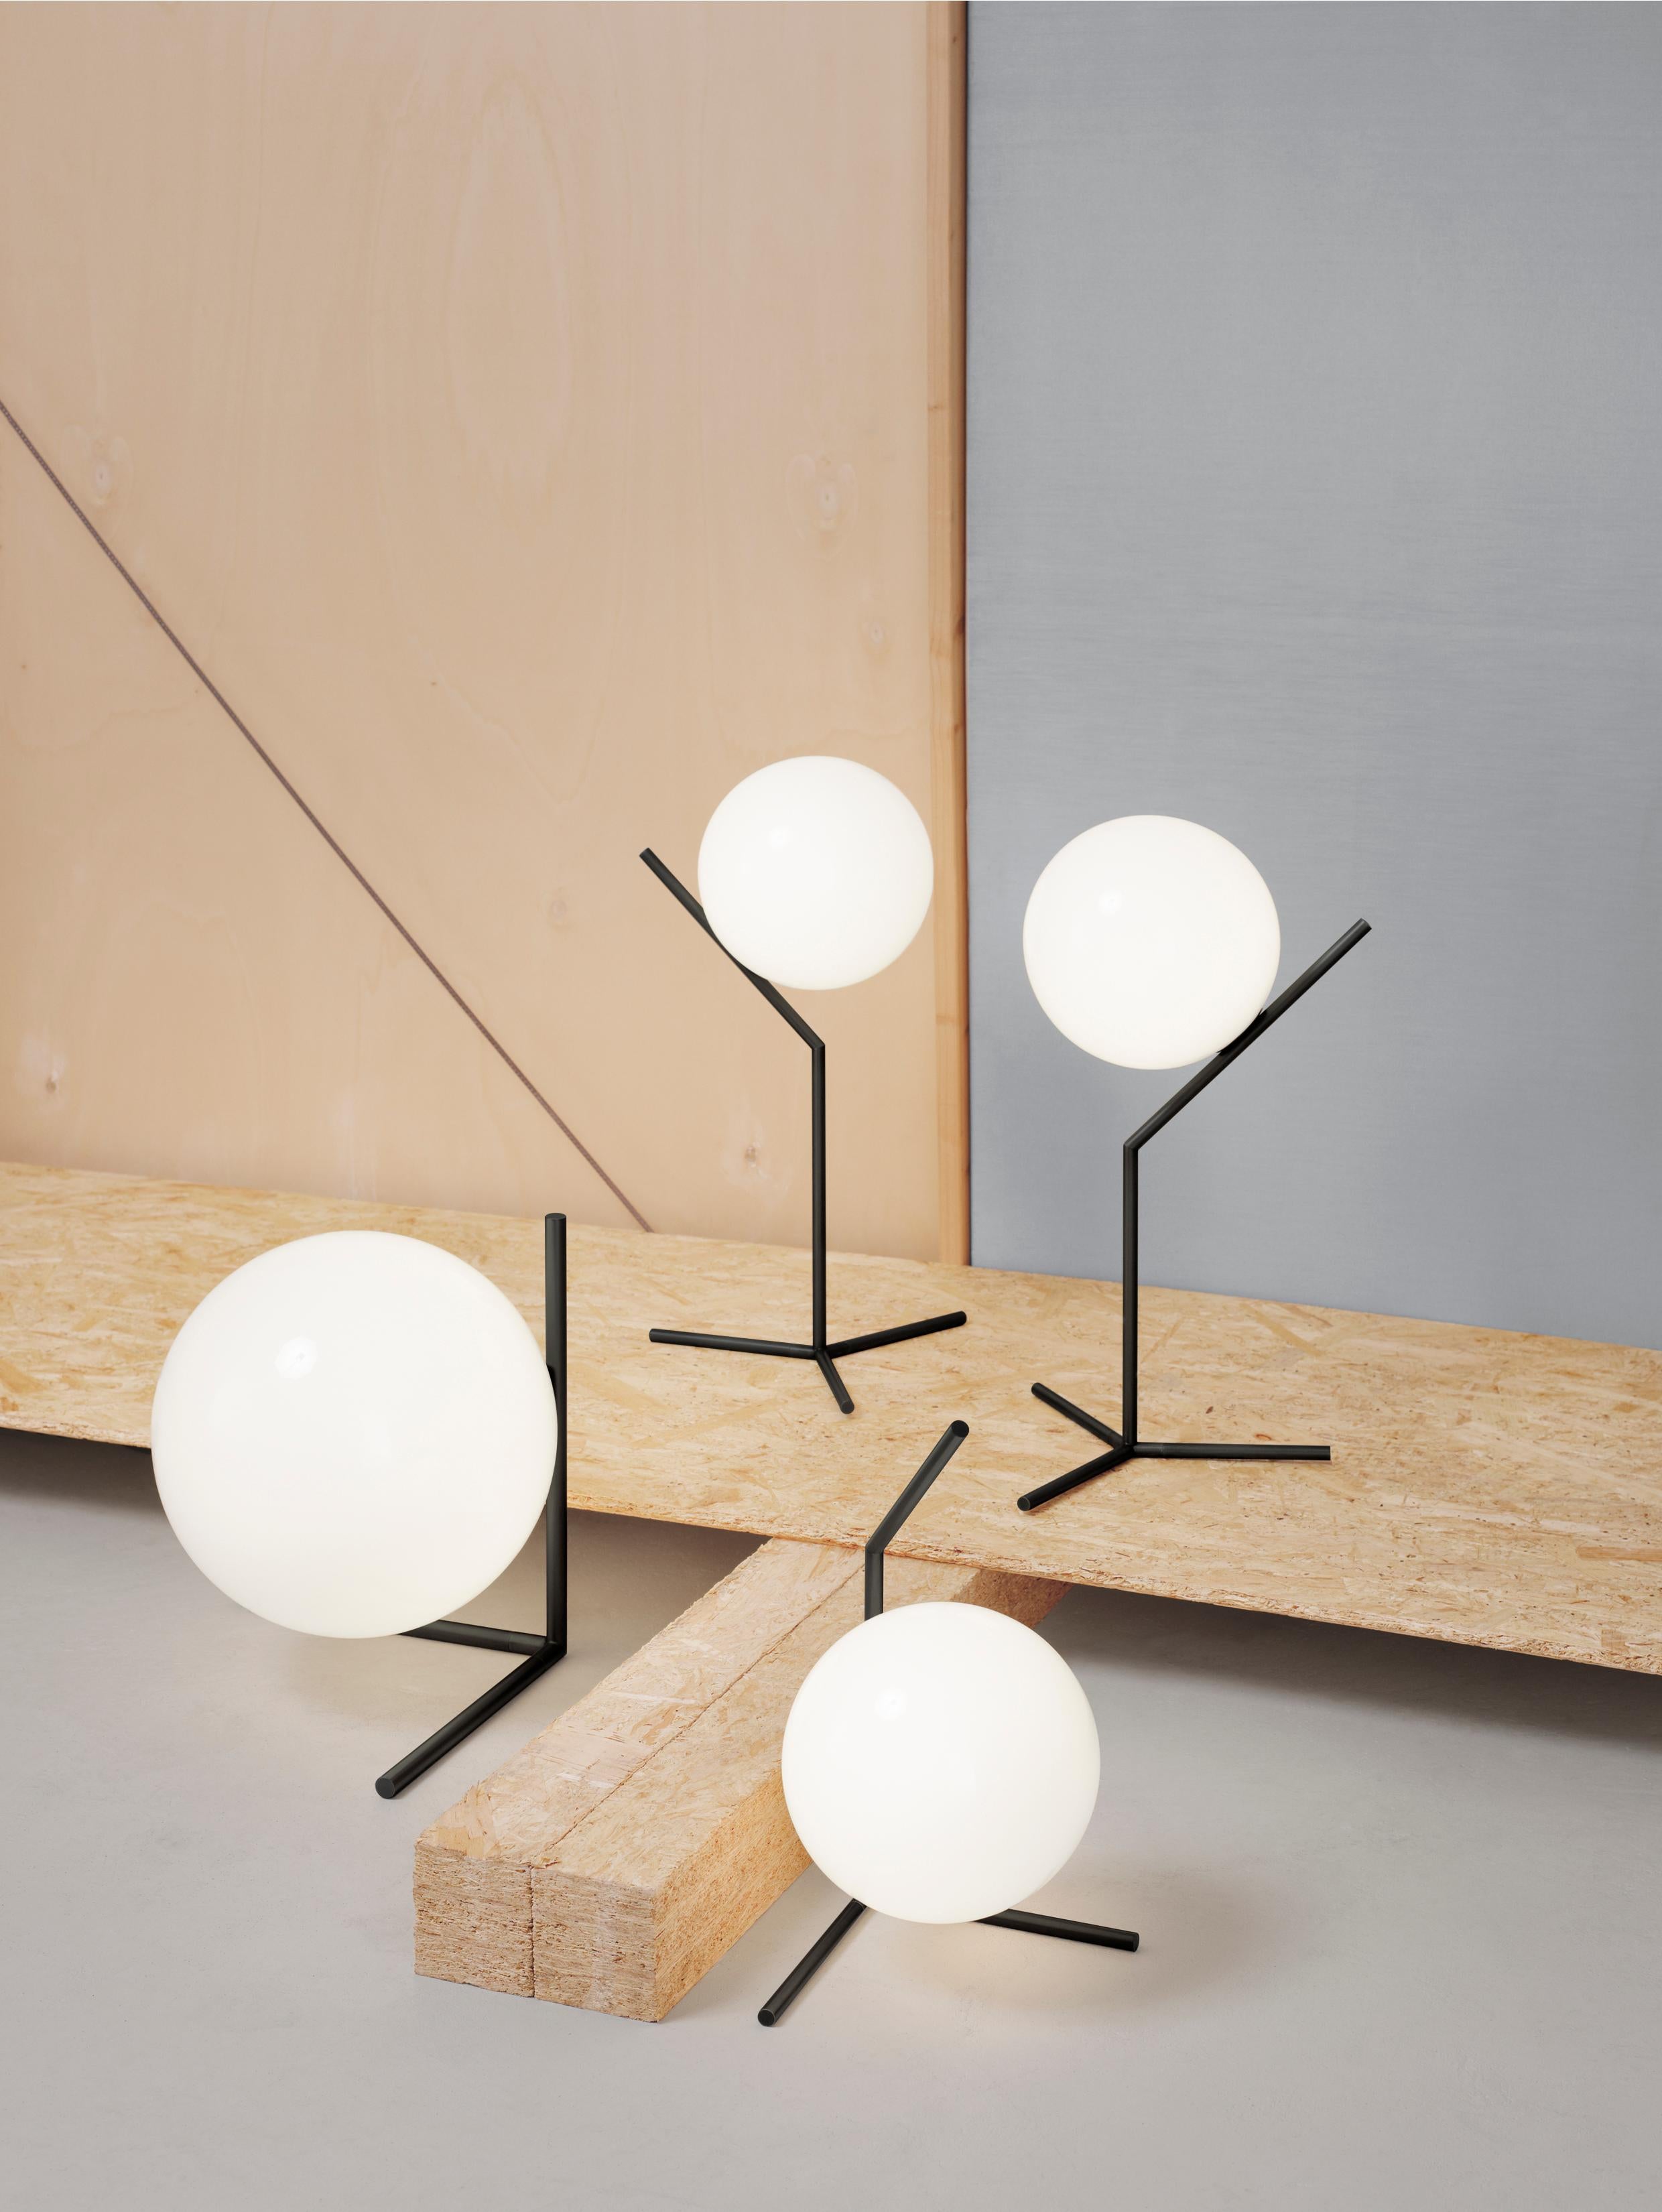 FLOS IC Lights T1 Low Table Lamp in Black by Michael Anastassiades

Like the other pieces in his IC Light Series, the IC Lights T balances designer Michael Anastassiades’ love of industrial simplicity with intricate symbolism. It provides diffused